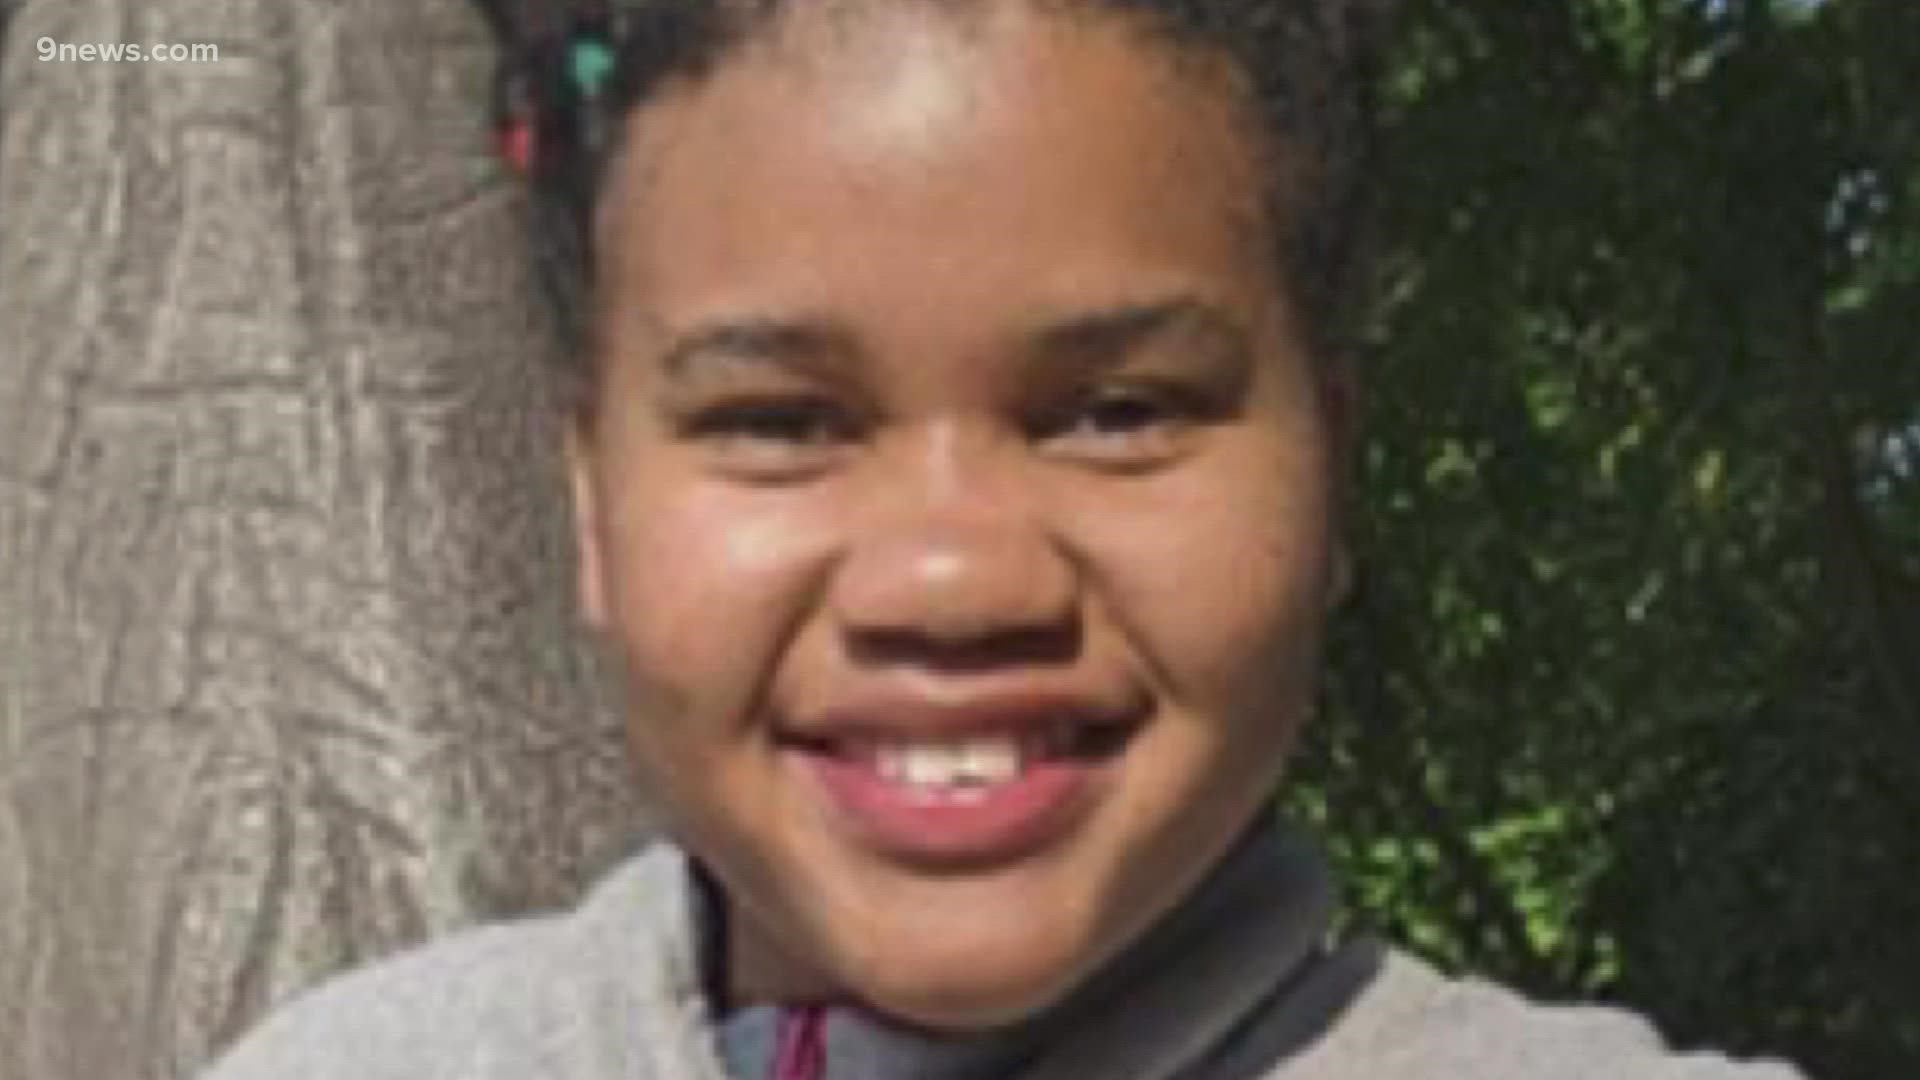 Ta-Kyrah Blackman was last seen on foot Tuesday in the area of Havana Street and East 1st Avenue, and investigators believe she may have been abducted.